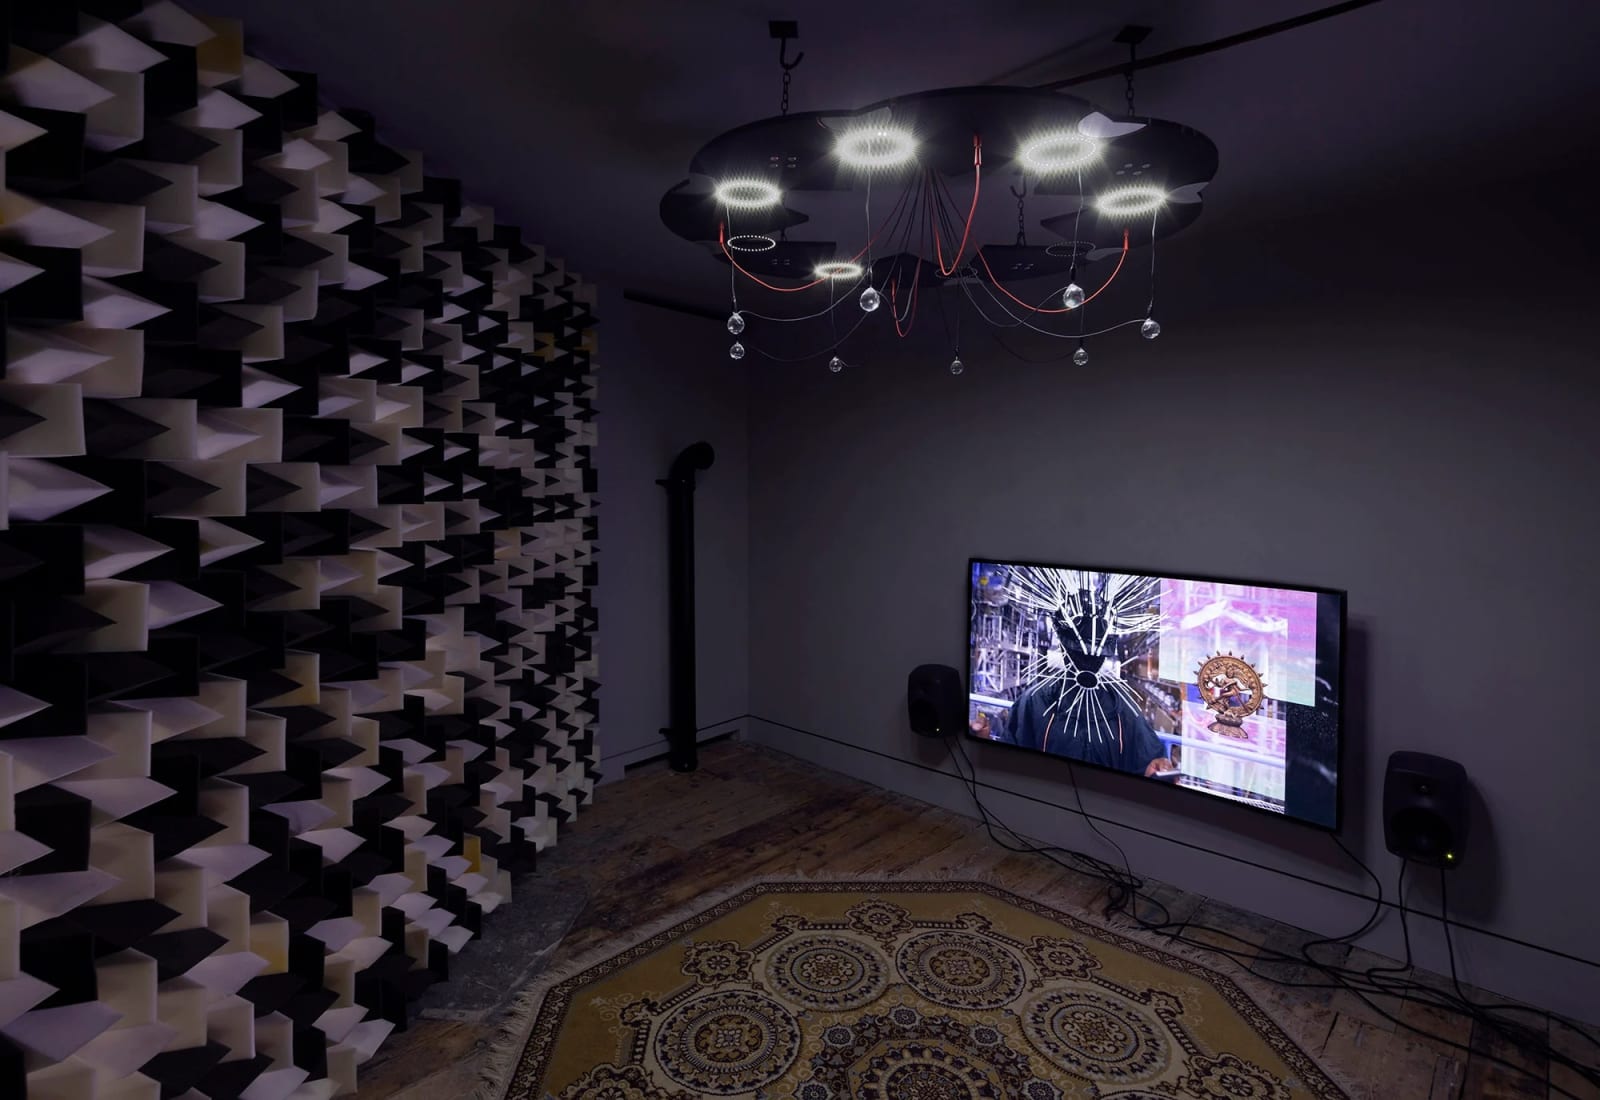 Haroon Mirza & Jack Jelfs The Wave Epoch, 2021 Installation view in the Immersive Room at Browns Brook Street, London